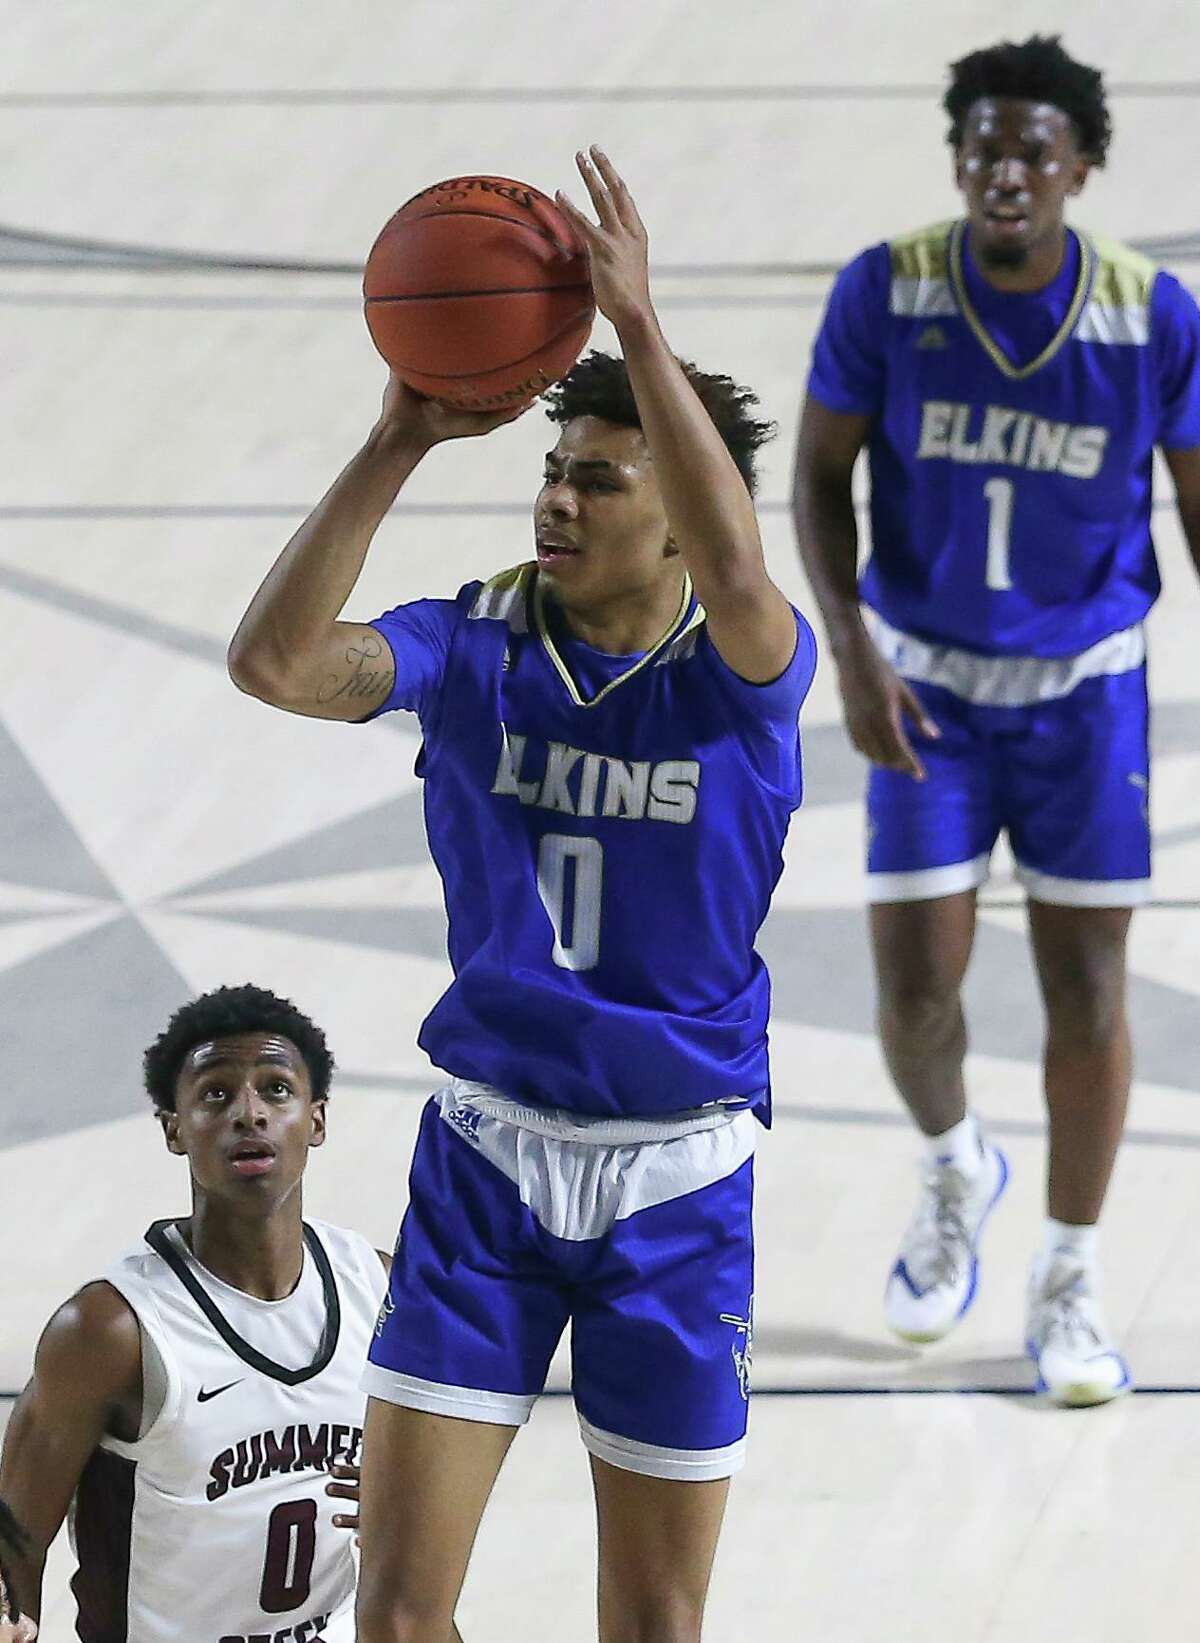 Elkins' Chris Johnson aims for the basket during the second quarter of a UIL 6A Region III Boys Basketball Playoffs Semifinal game against Summer Creek Tuesday, March 2, 2021, at Delmar Fieldhouse in Houston.